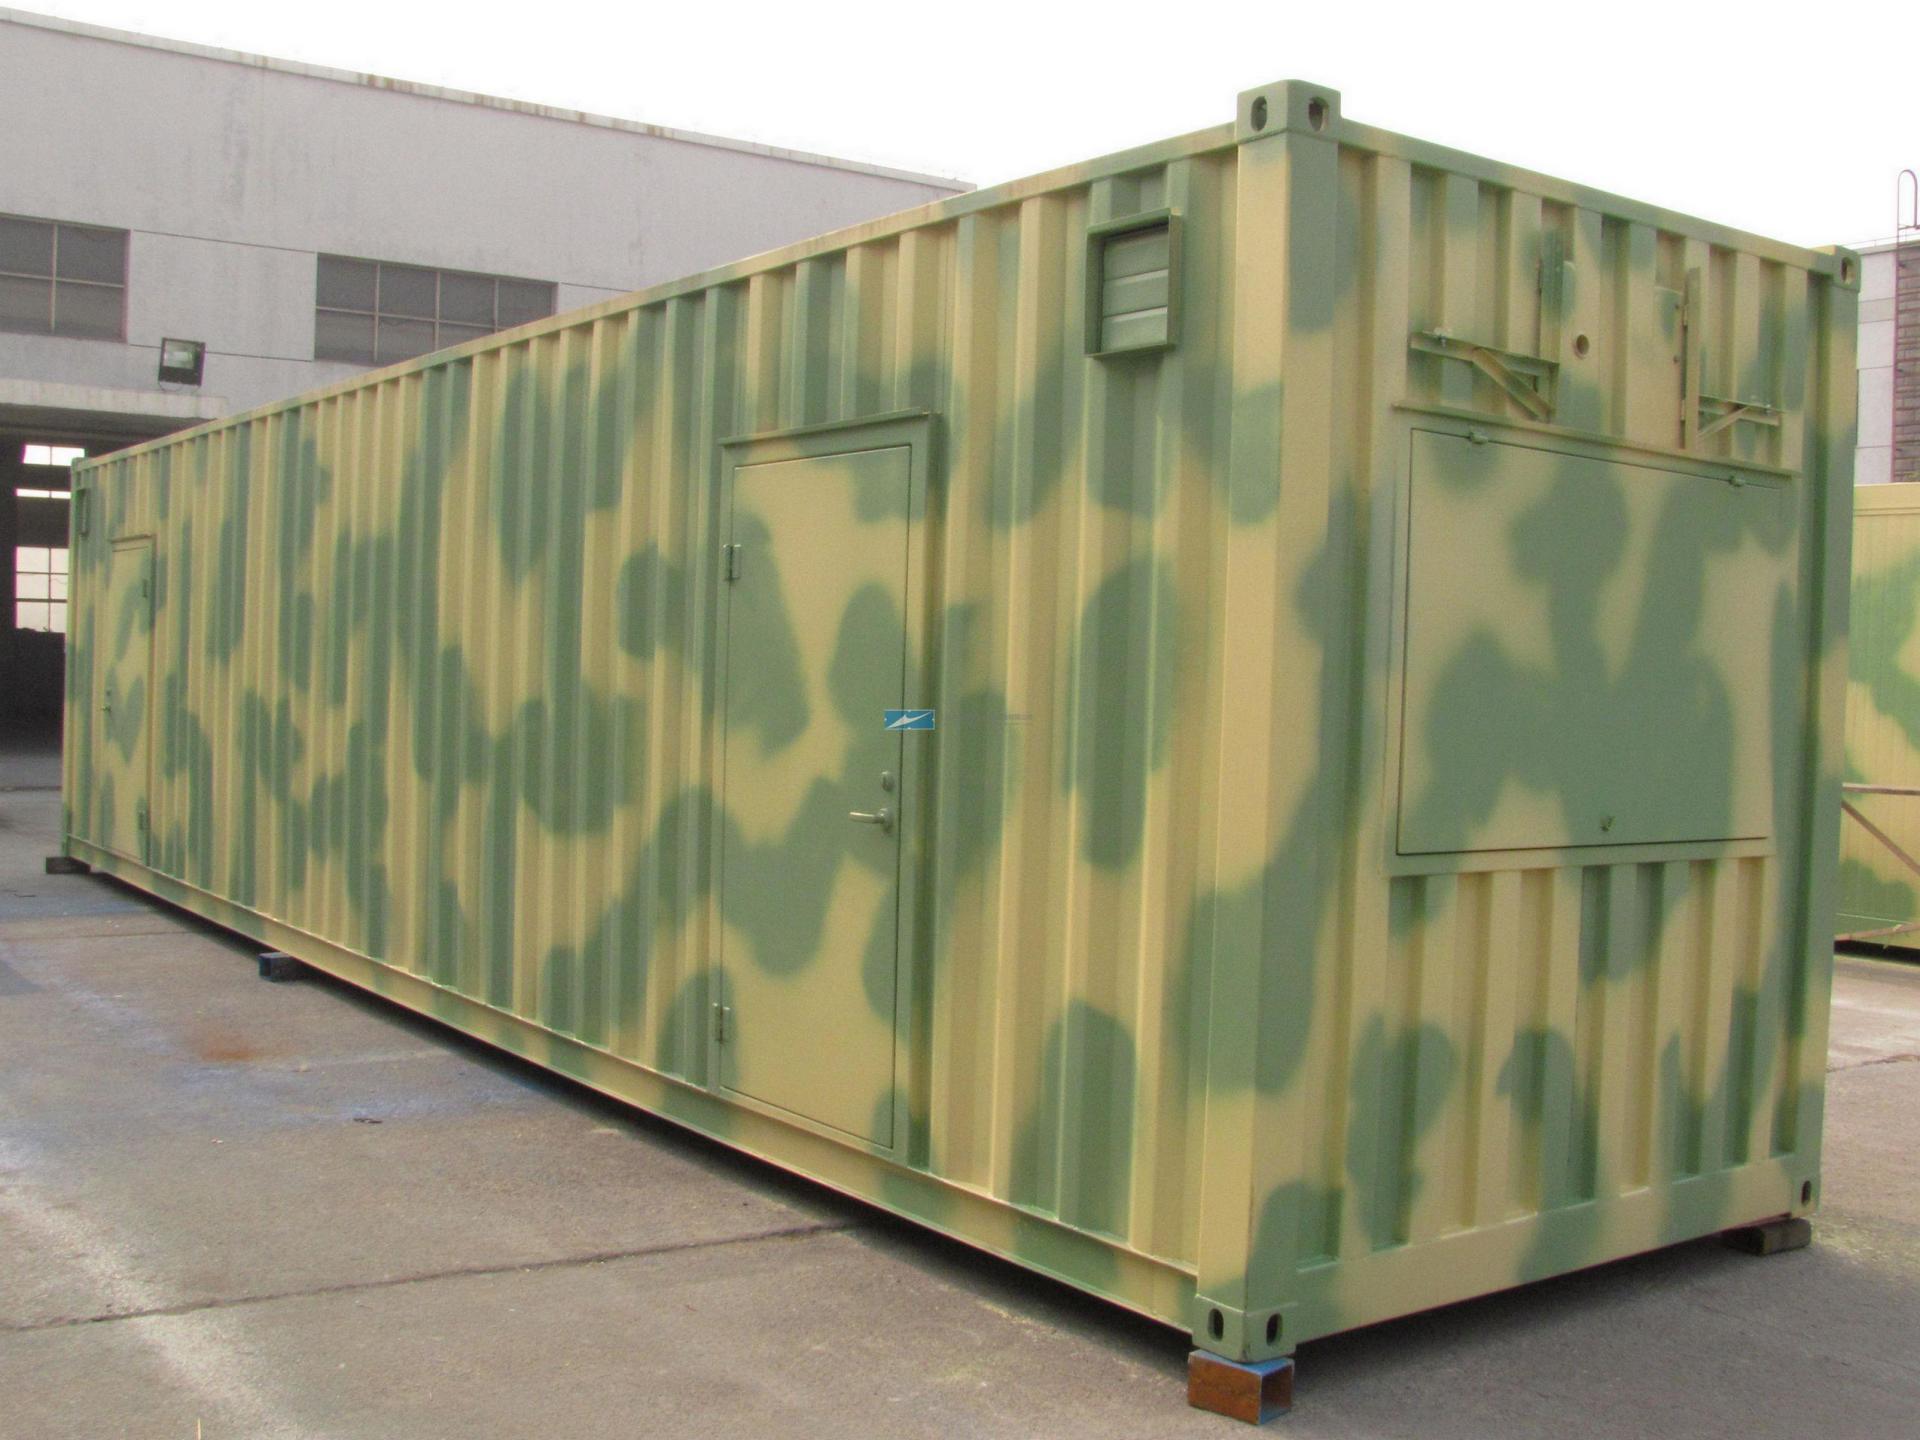 Warehouse type container